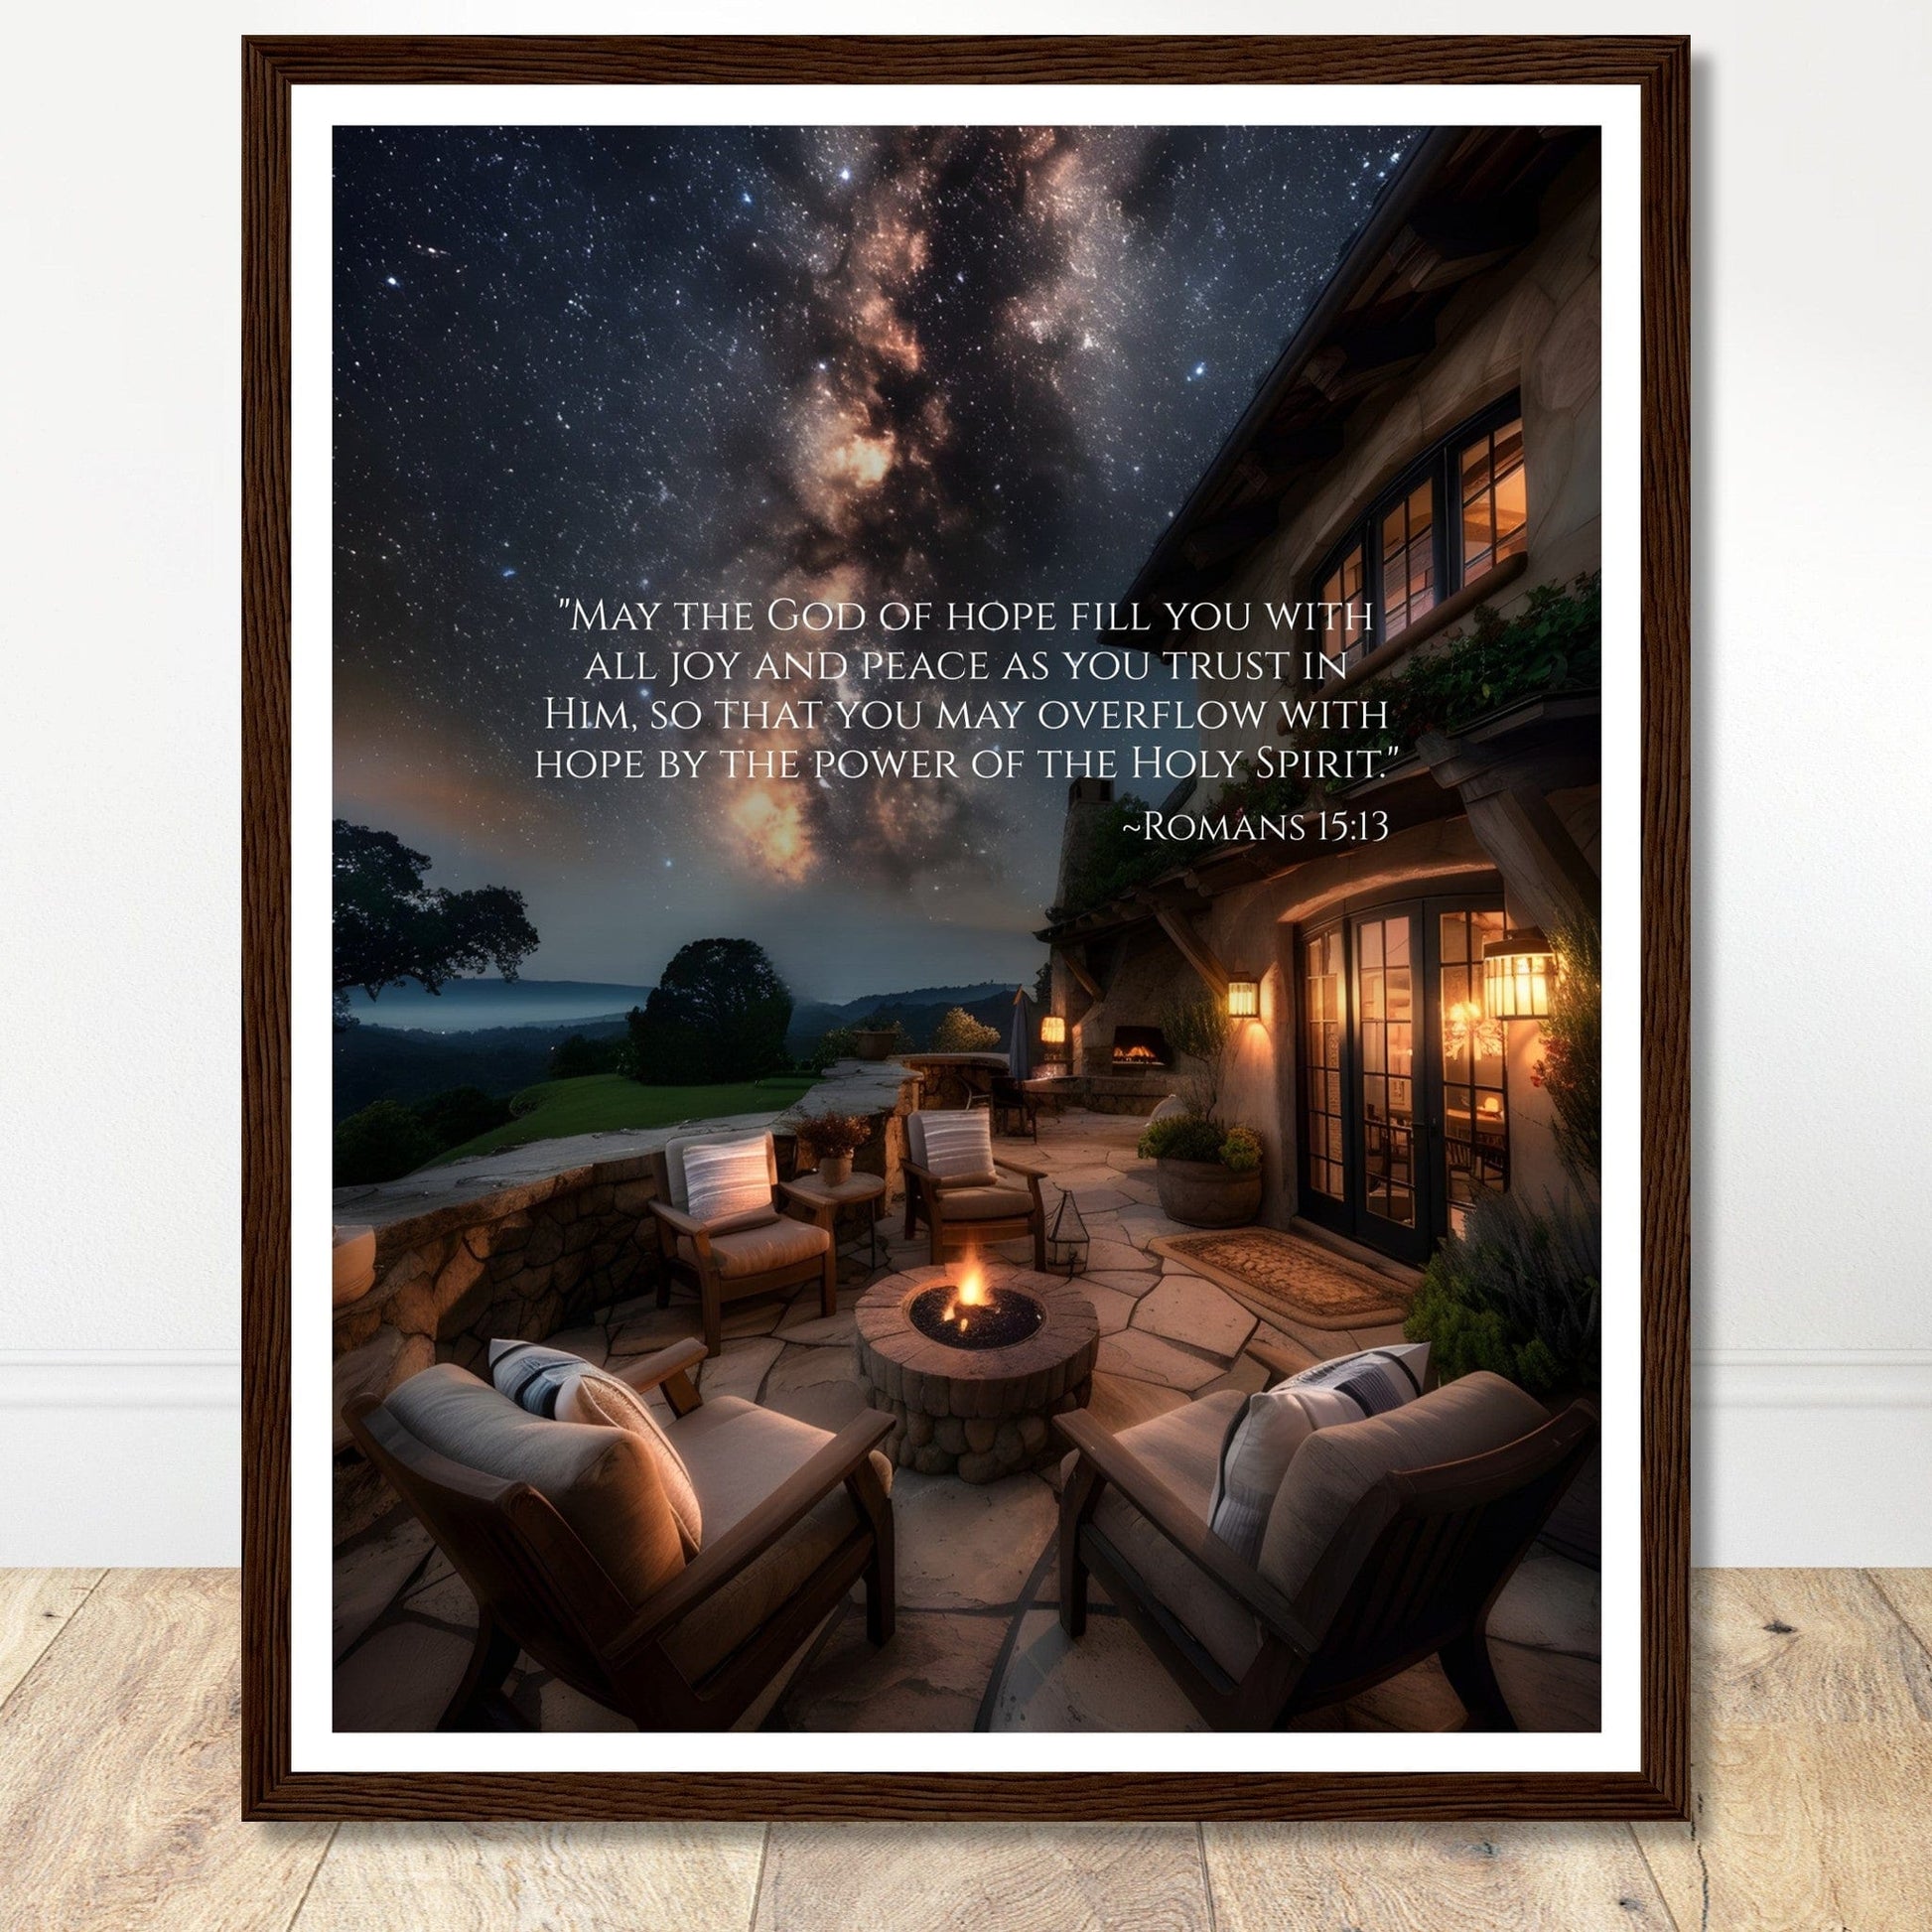 Coffee With My Father Print Material 40x50 cm / 16x20″ / Premium Matte Paper Wooden Framed Poster / Dark wood frame God of Hope